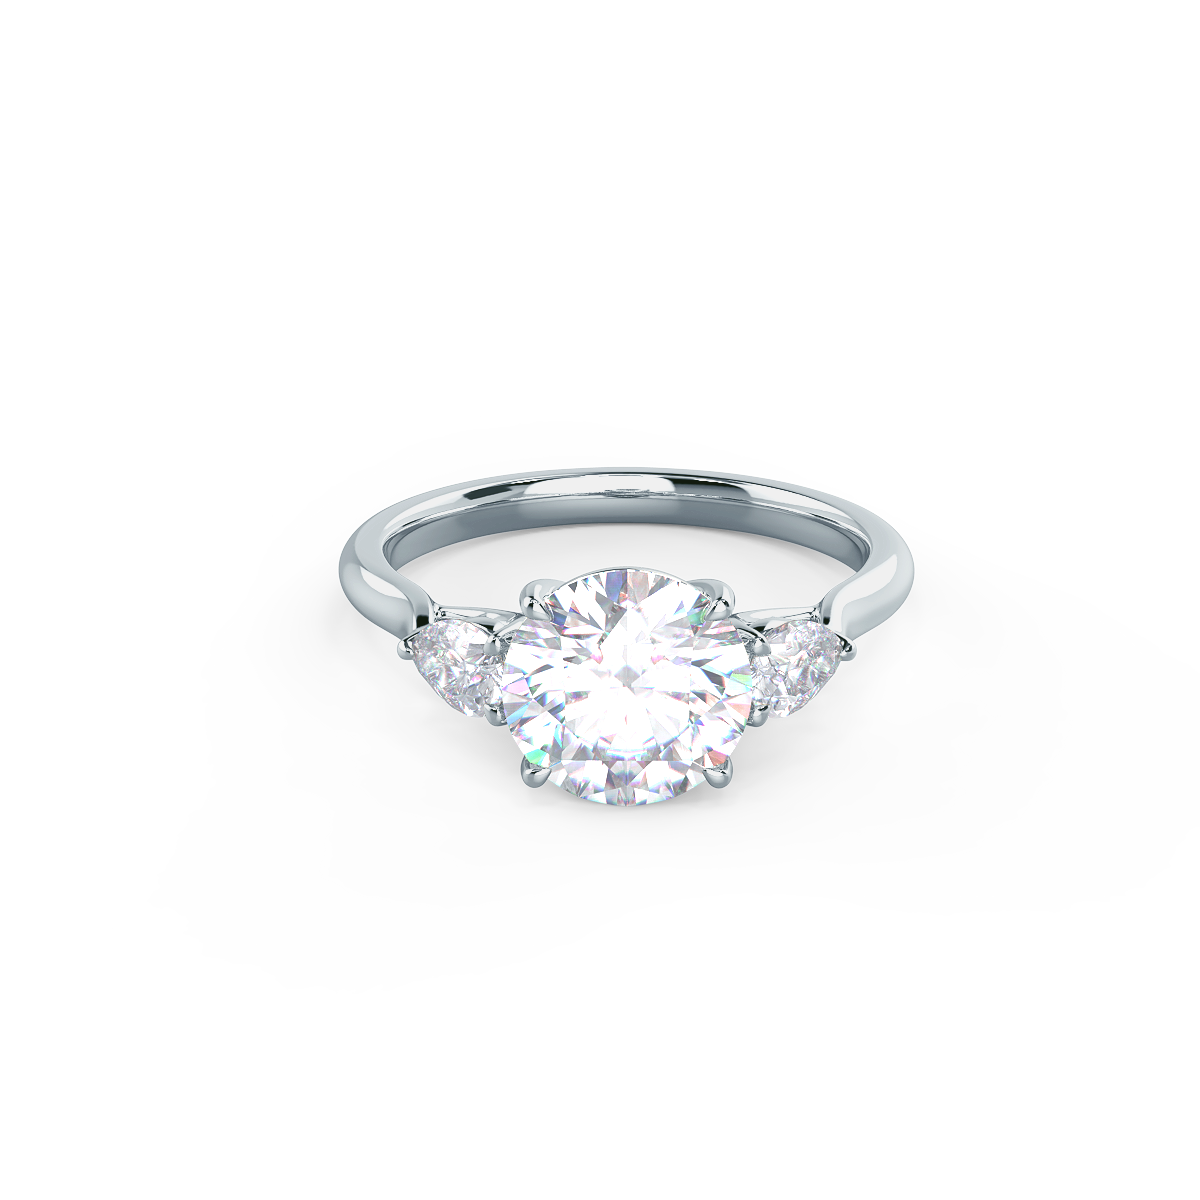 ROUND AND PEAR SETTING Lab-Created Diamond Ring DEF Color VS+ Clarity